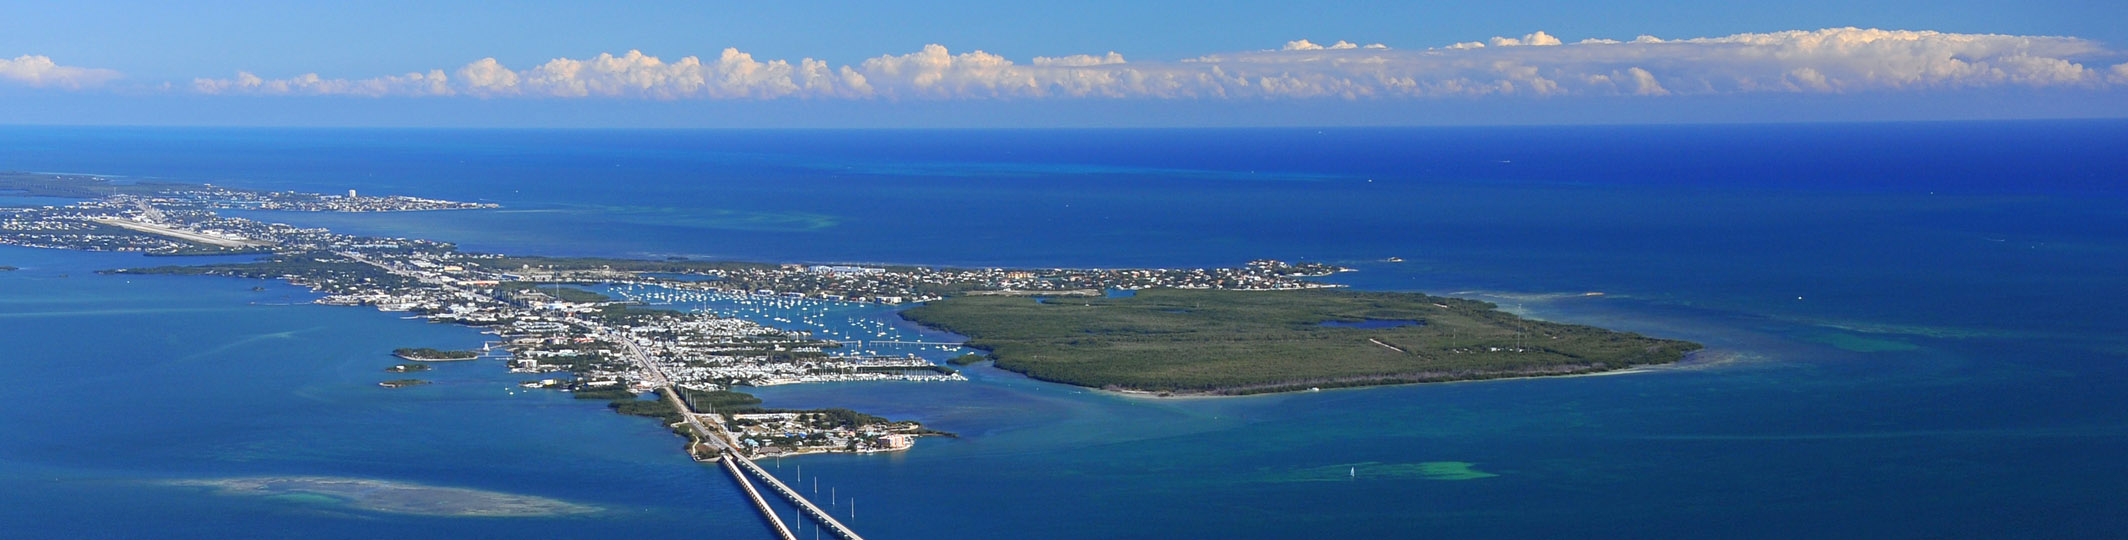 The Florida Keys Tropical Islands 120 Miles - Atlantic Ocean and Gulf of Mexico